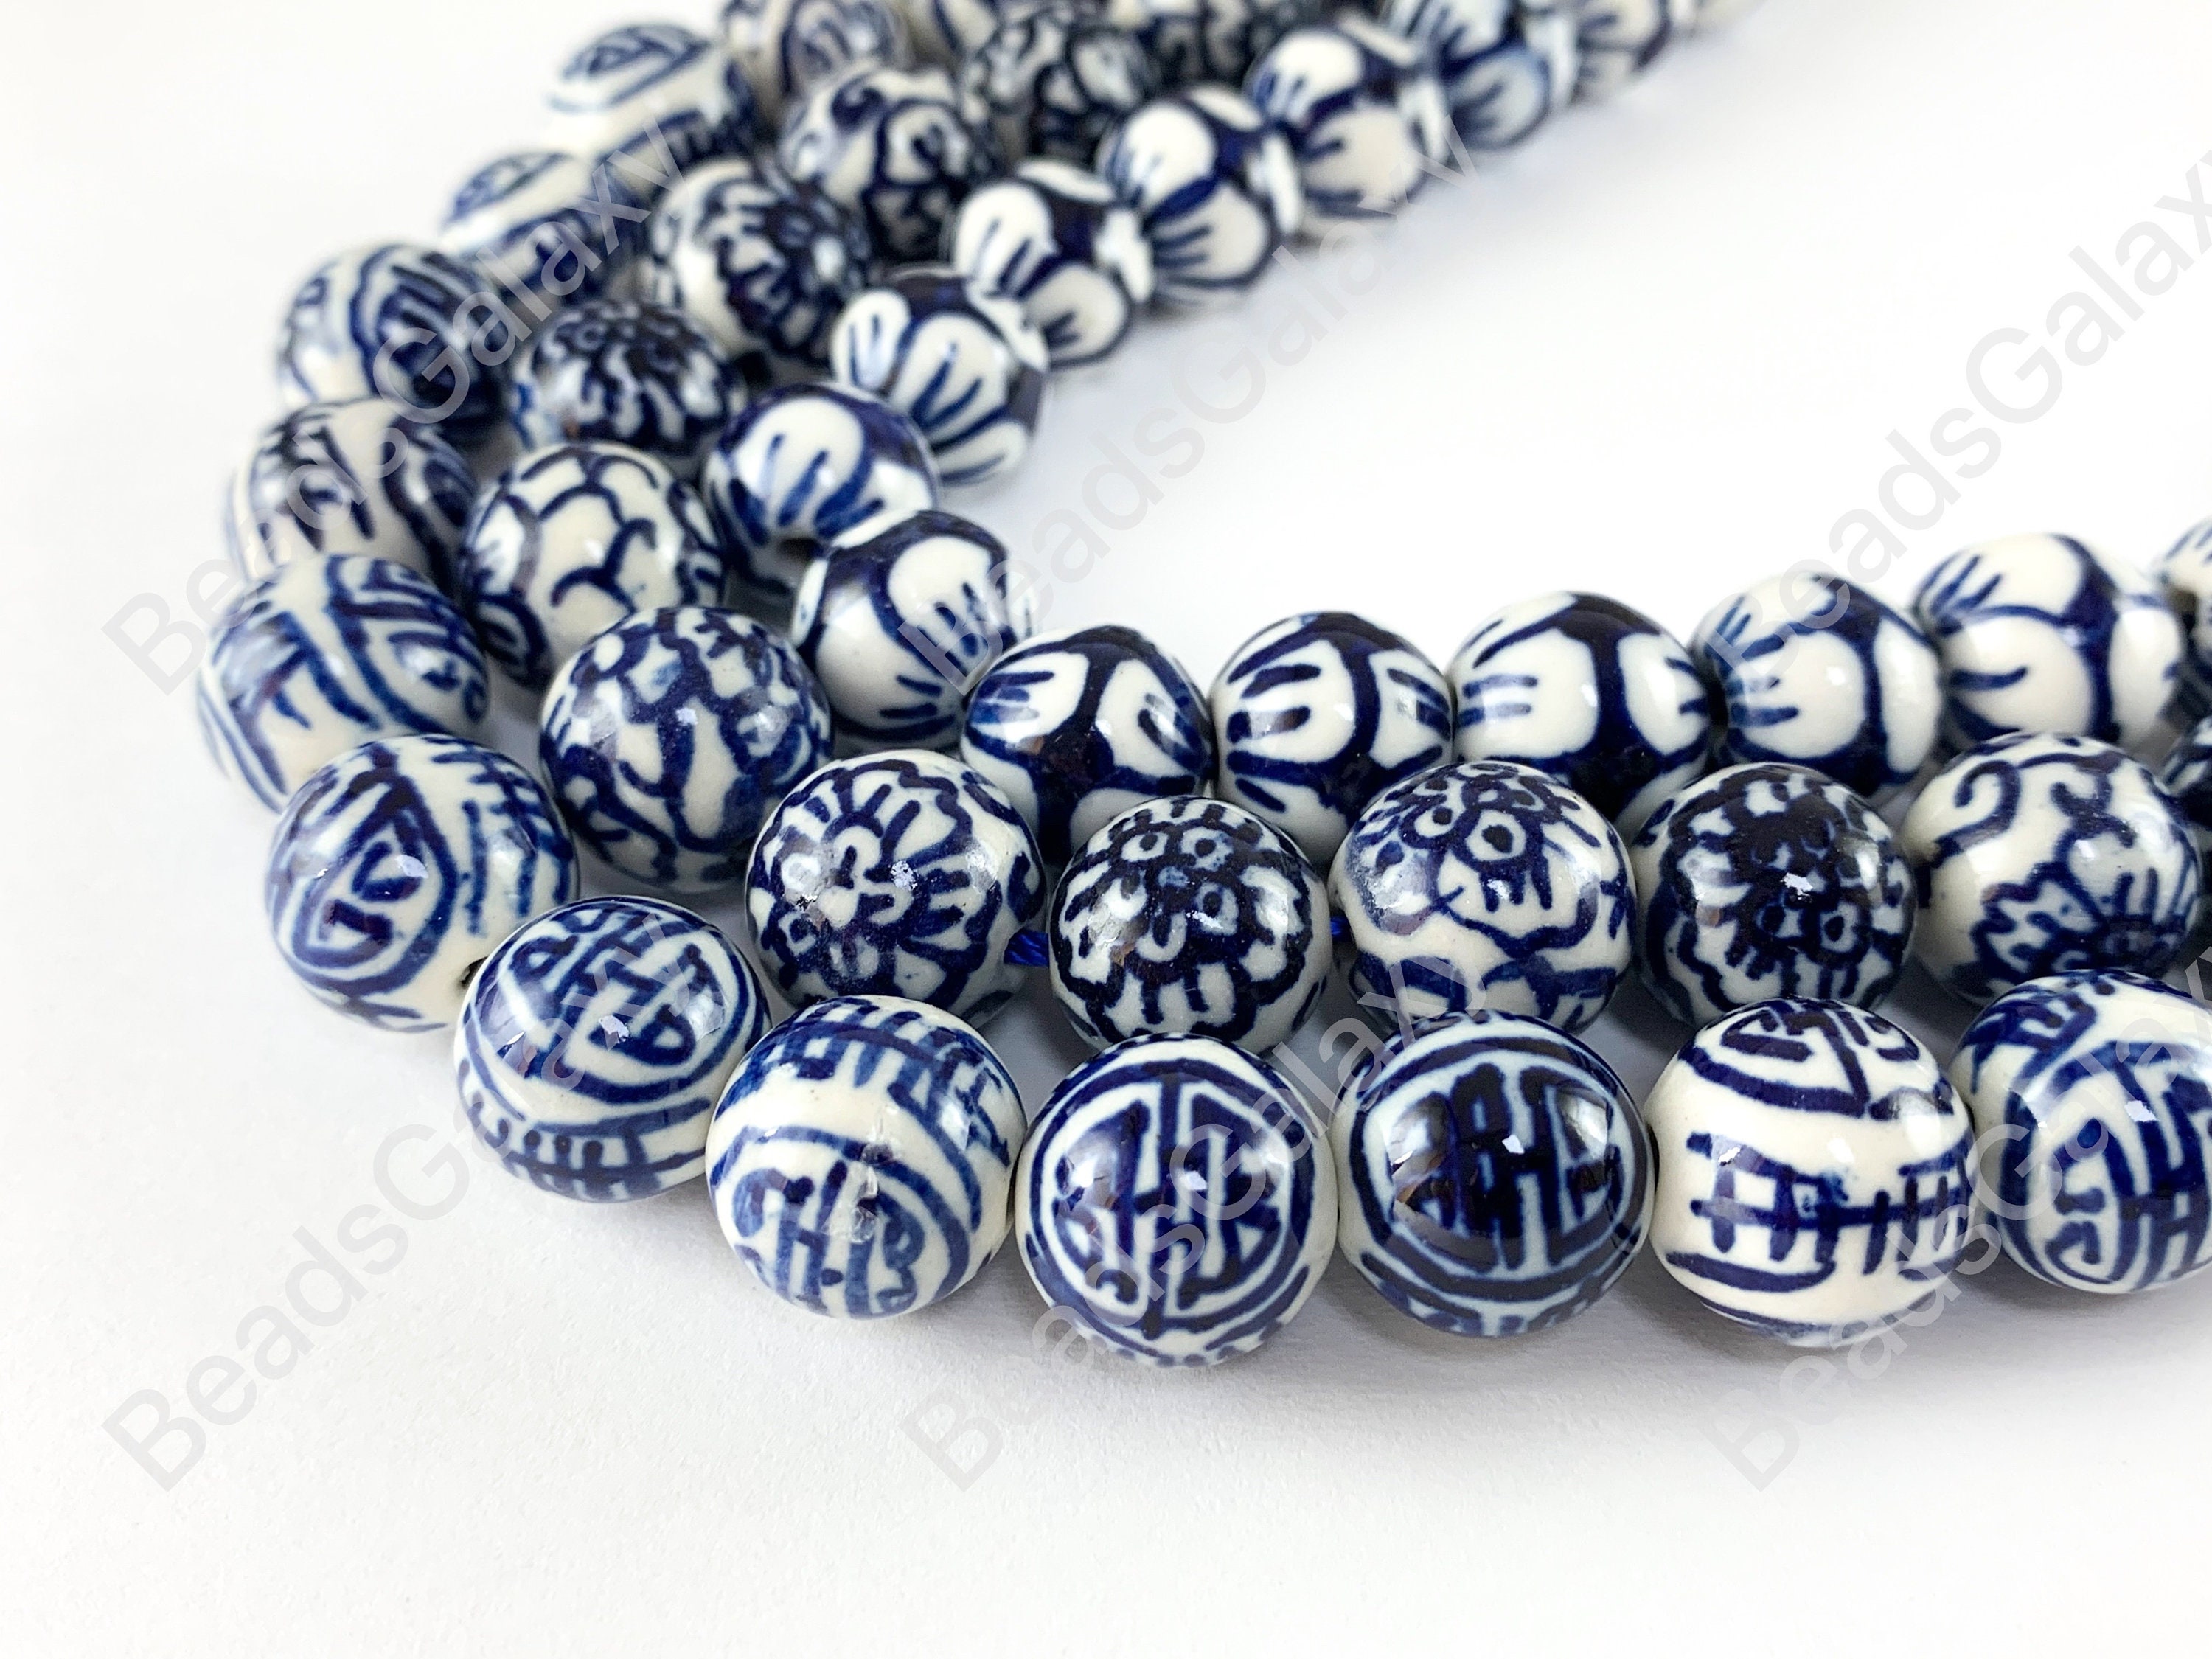 Antique Chinese translucent bubbly blue“Peking Glass” beads.9-10mm